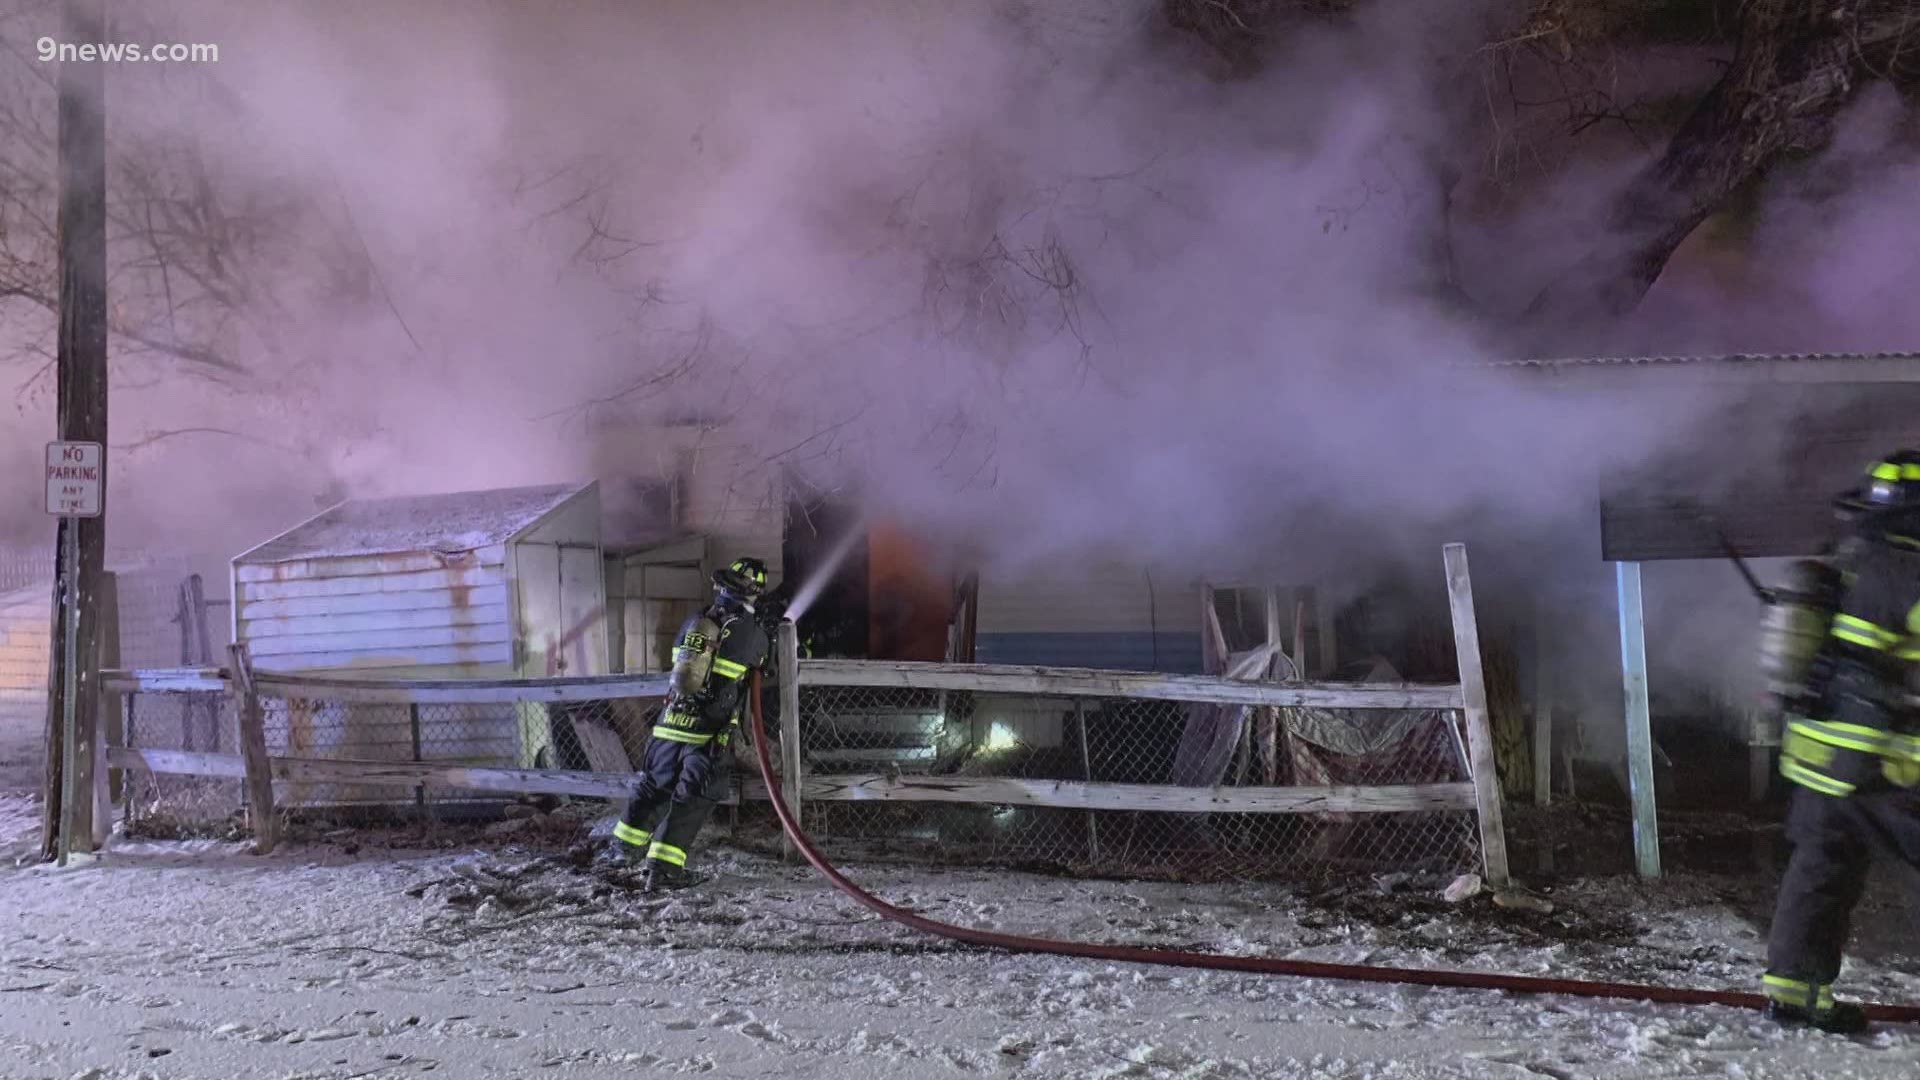 Four people were taken to hospitals after the fire early Sunday morning, Adams County Fire Rescue said.